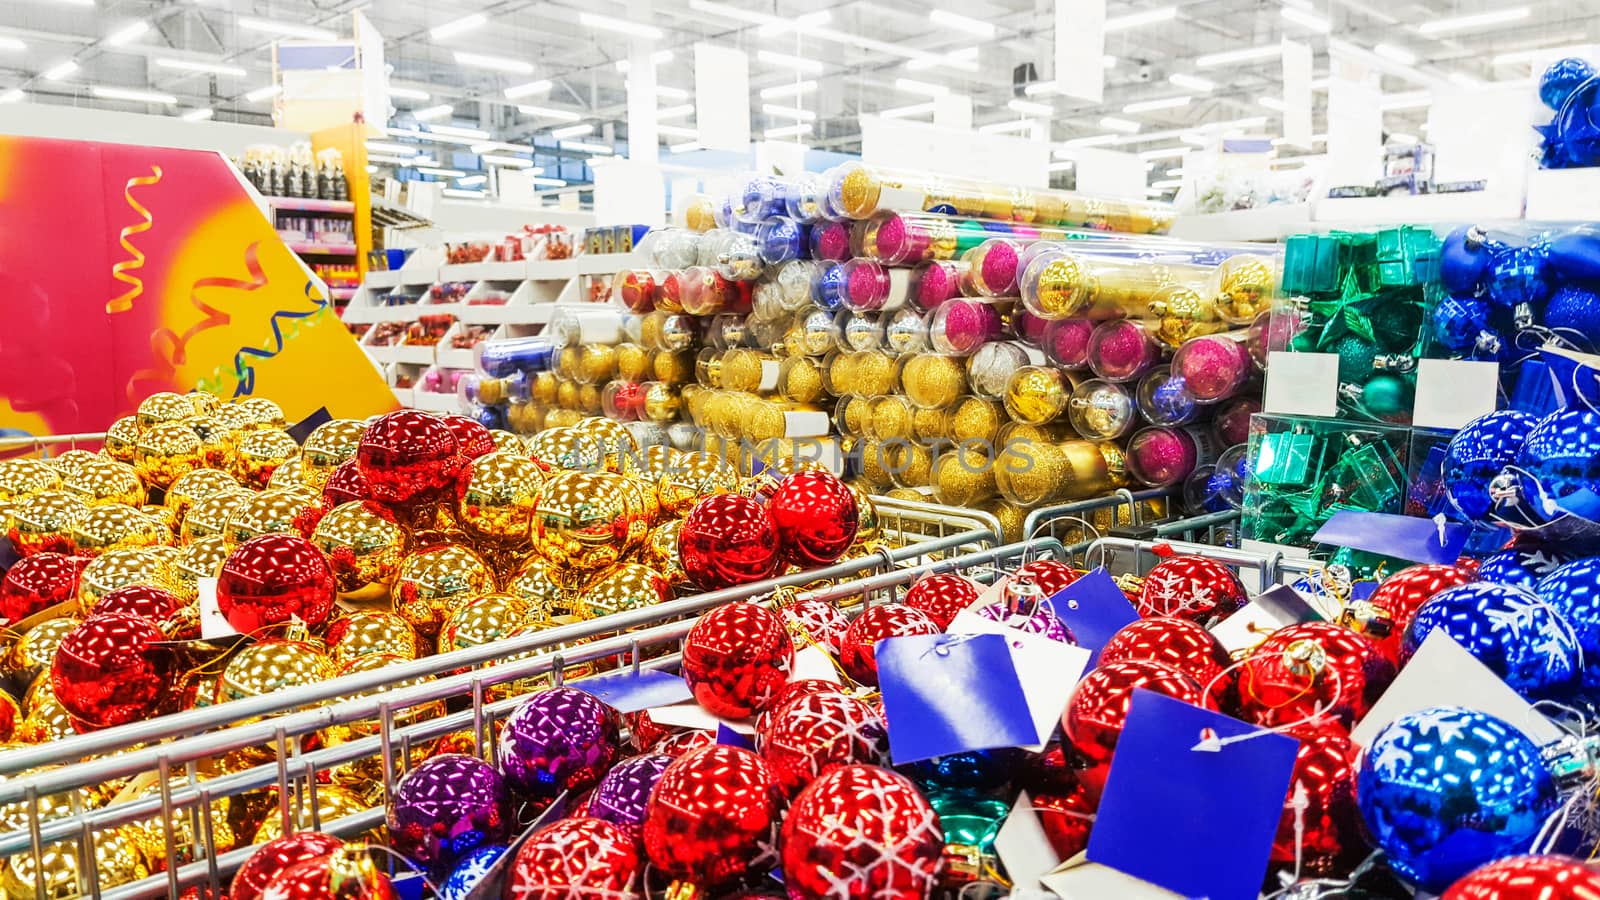 Colored Christmas toys in store. Christmas decorations.